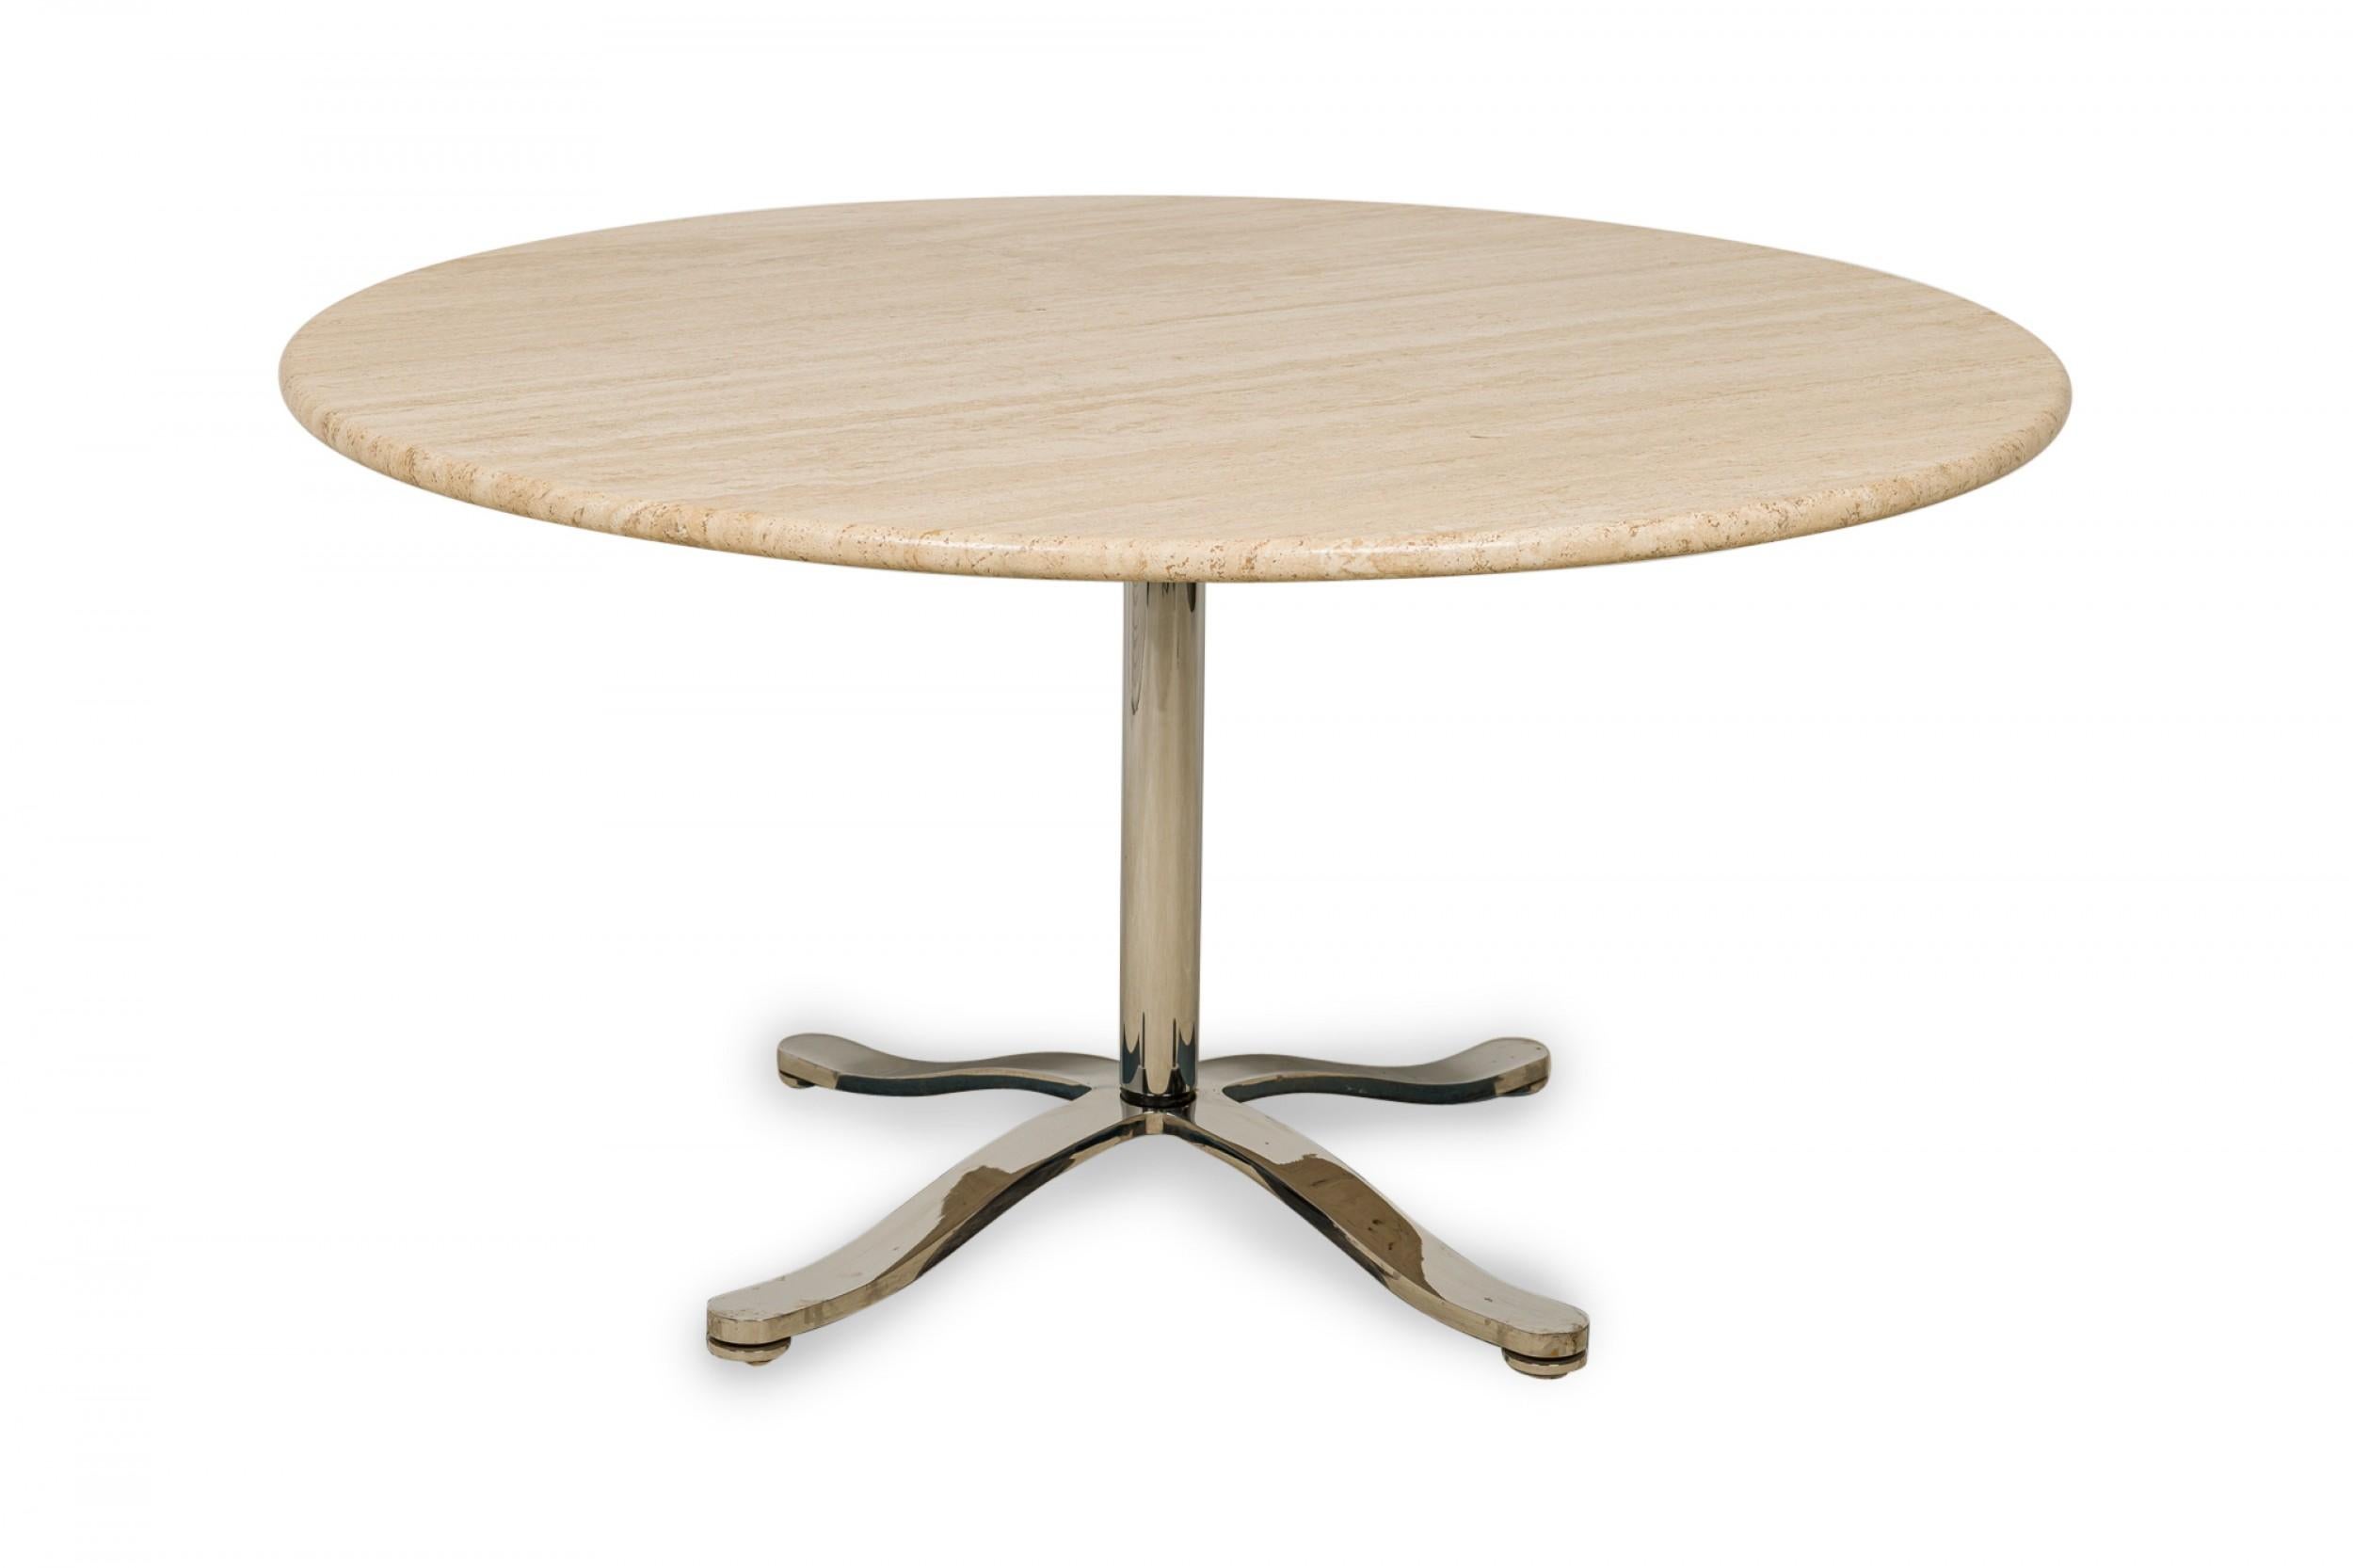 Nicos Zographos Circular Travertine and Steel Dining Table In Good Condition For Sale In New York, NY